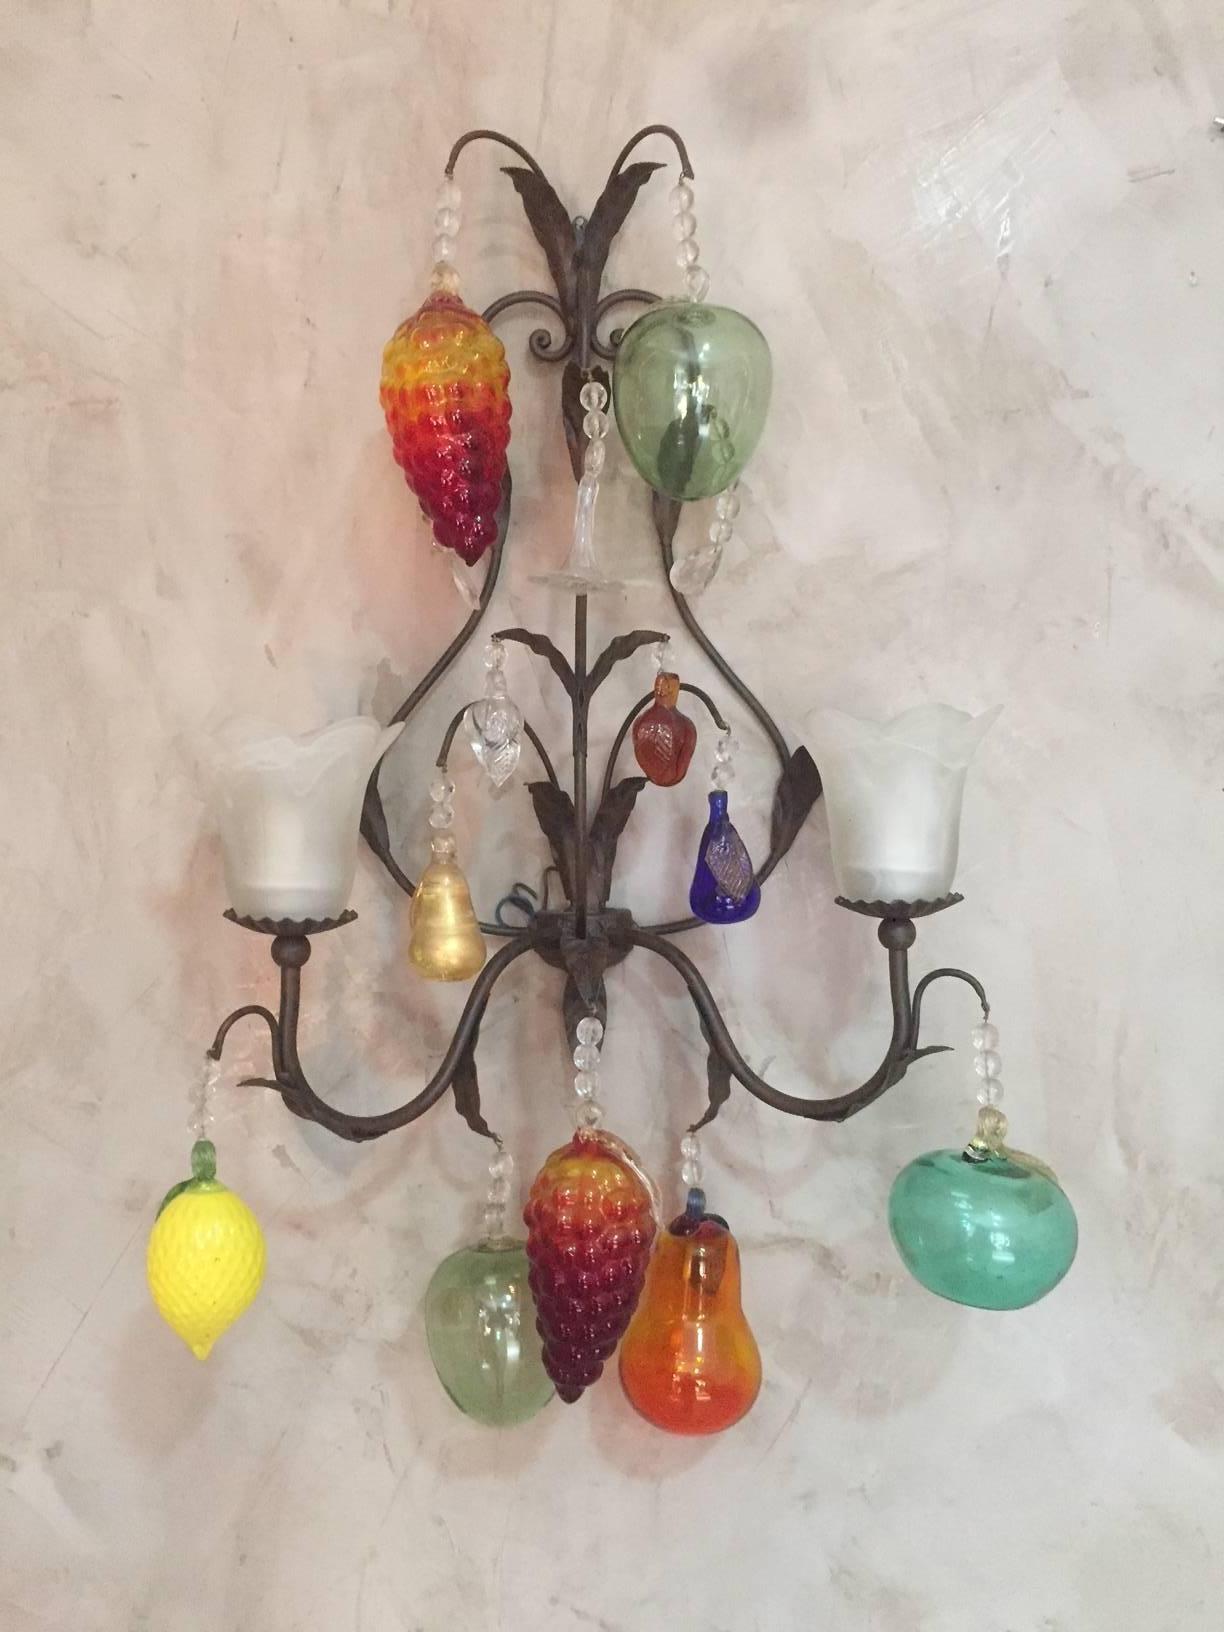 Special Murano order for a French restaurant in Lyon (South East). Very nice decorative fruits in Murano glass (Italian) wall lamp. Each fruit is blown glass. Apple, pear, lemon, grapes.
Model unique.